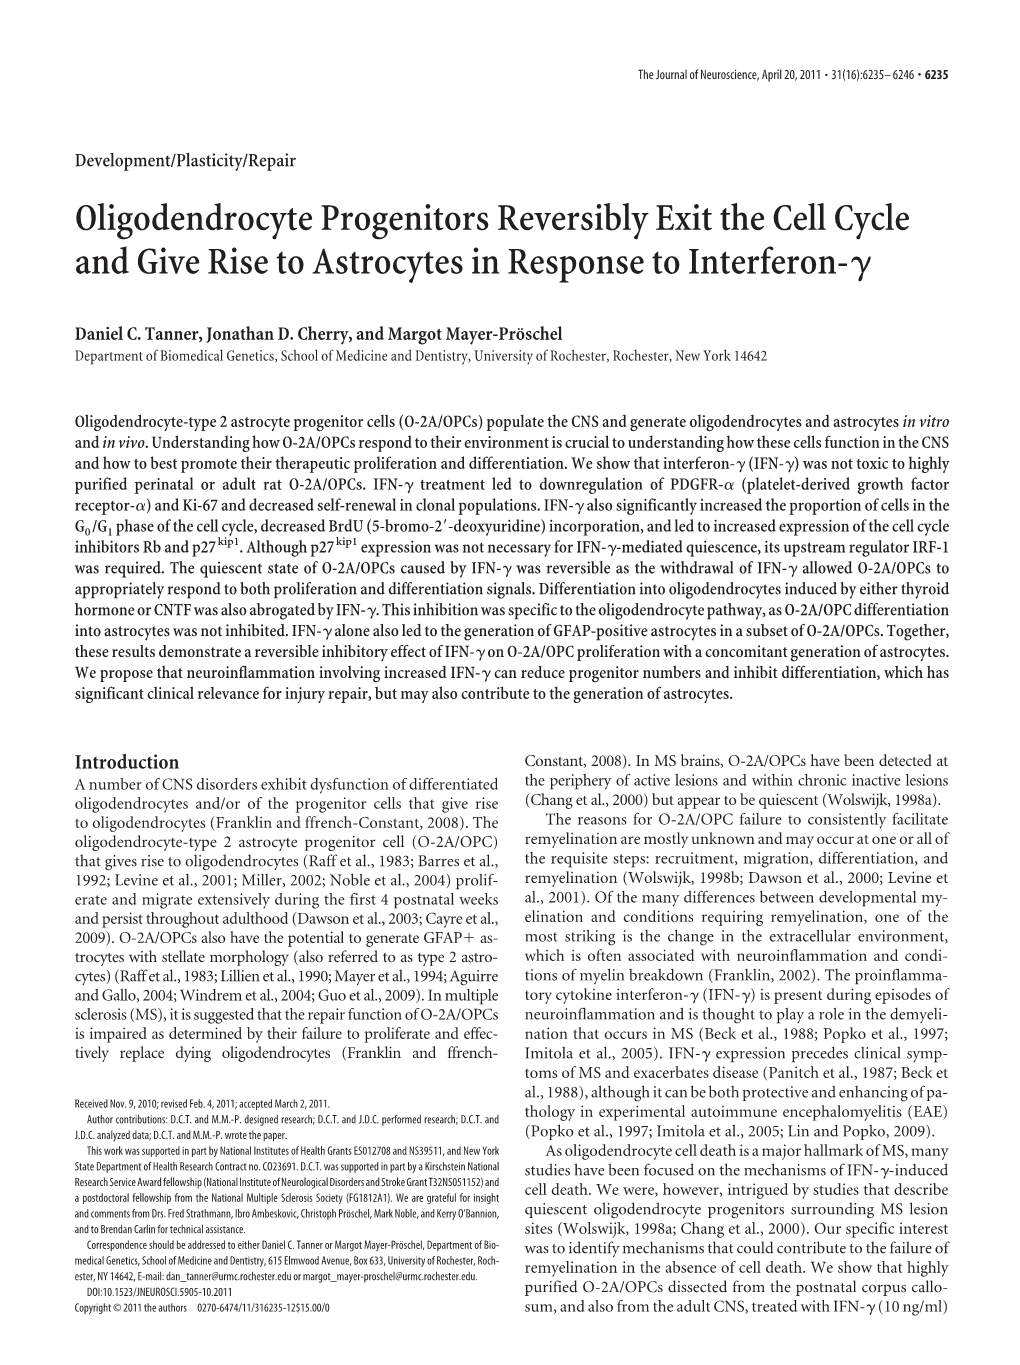 Oligodendrocyte Progenitors Reversibly Exit the Cell Cycle and Give Rise to Astrocytes in Response to Interferon-␥